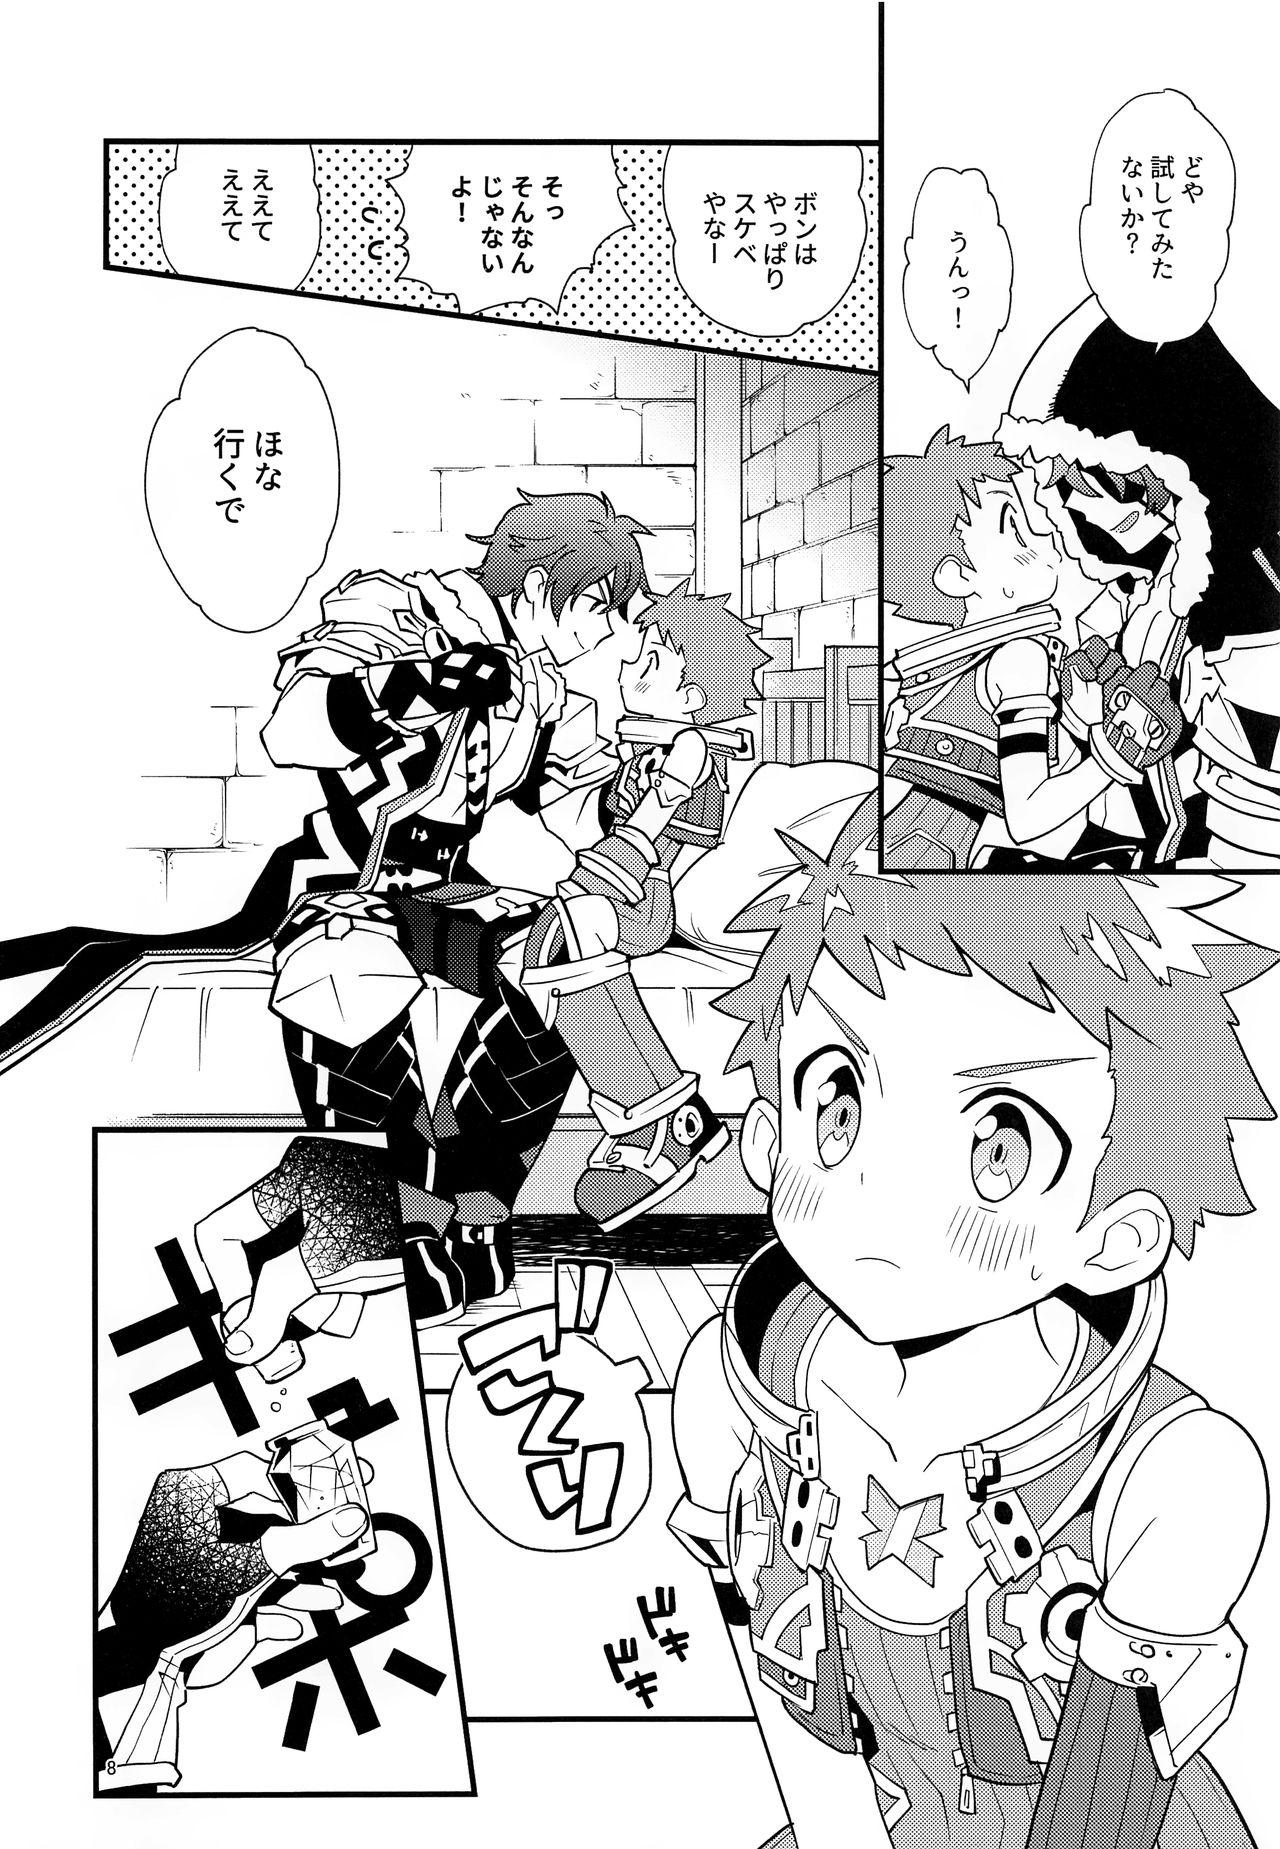 Cheating TROP DUEX - Xenoblade chronicles 2 Moan - Page 7